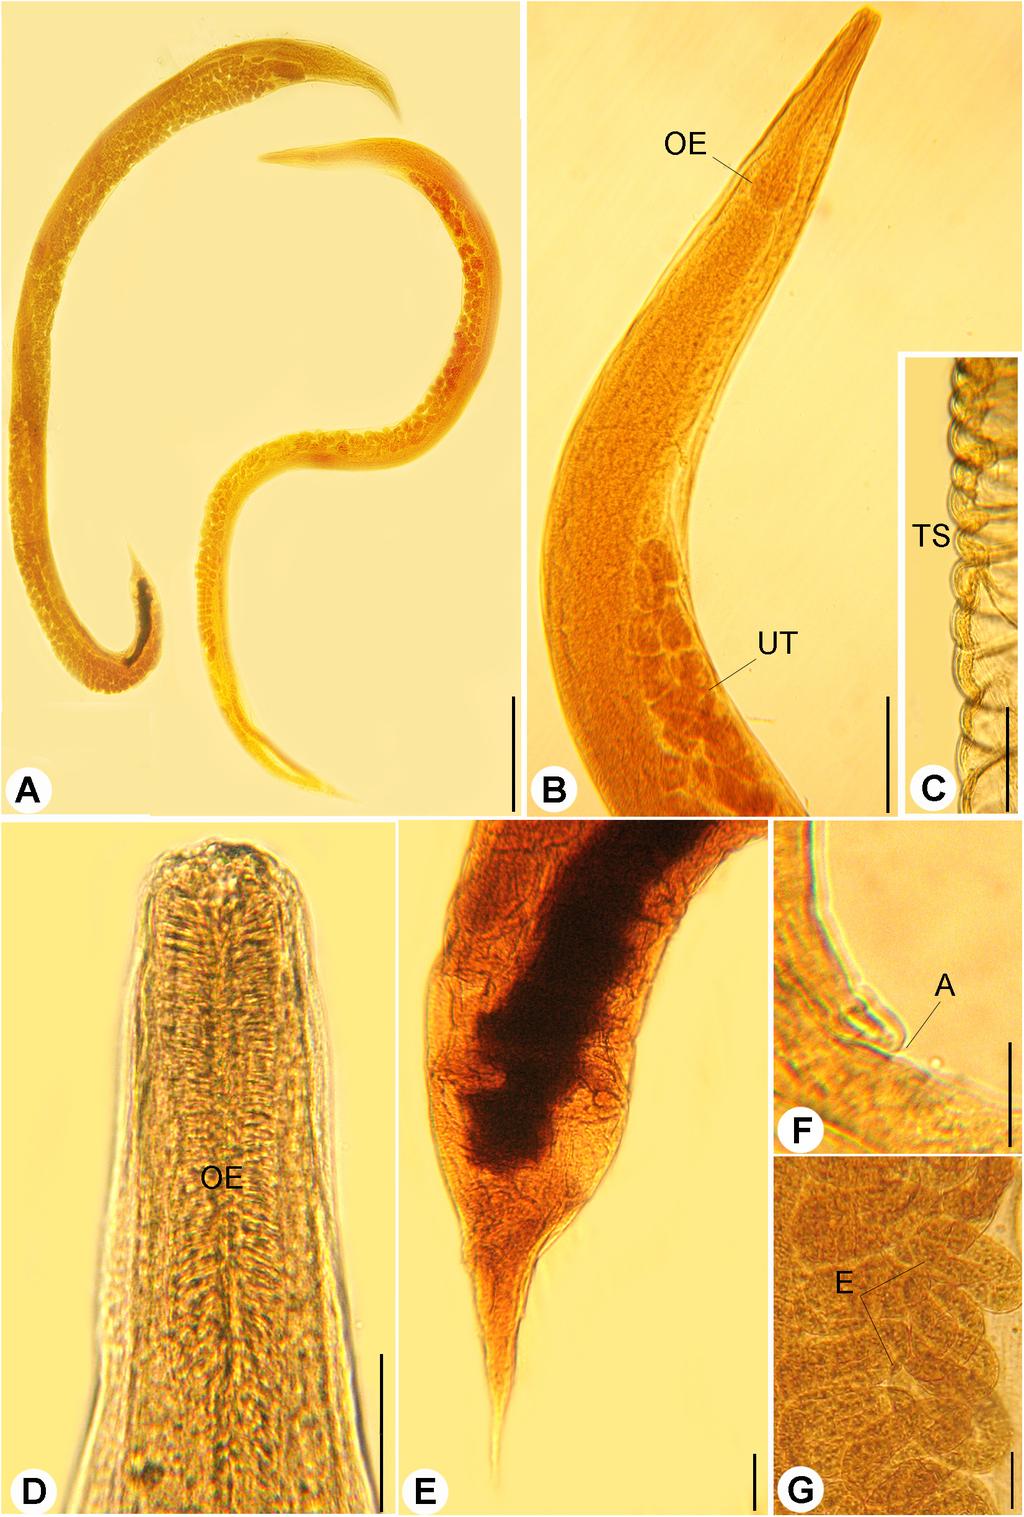 Figure 1 Light micrographs of R. bufonis. (A) Females, left and right lateral views, scale bar 0.7 mm. (B) Anterior part, lateral view; OE, esophagus; UT, uterus, scale bar 0.17 mm.